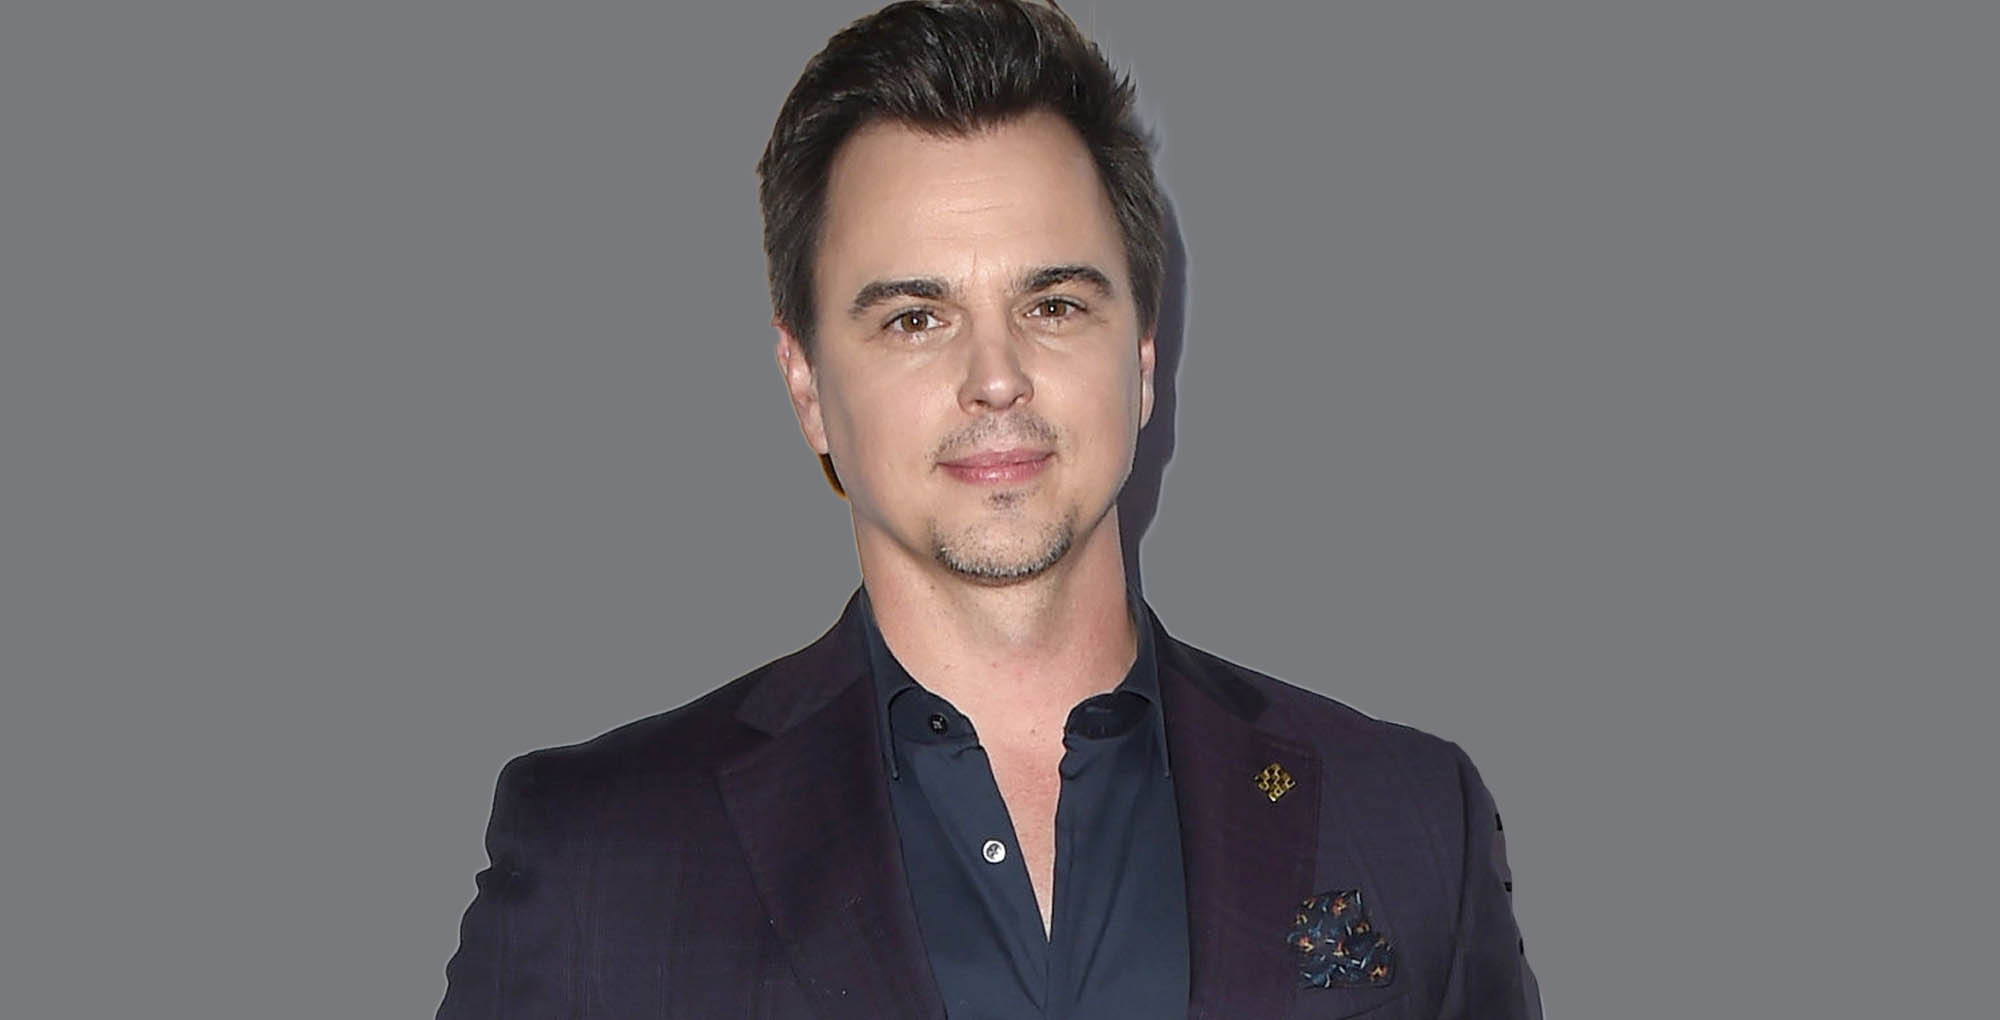 darin brooks the bold and the beautiful wearing a suit.